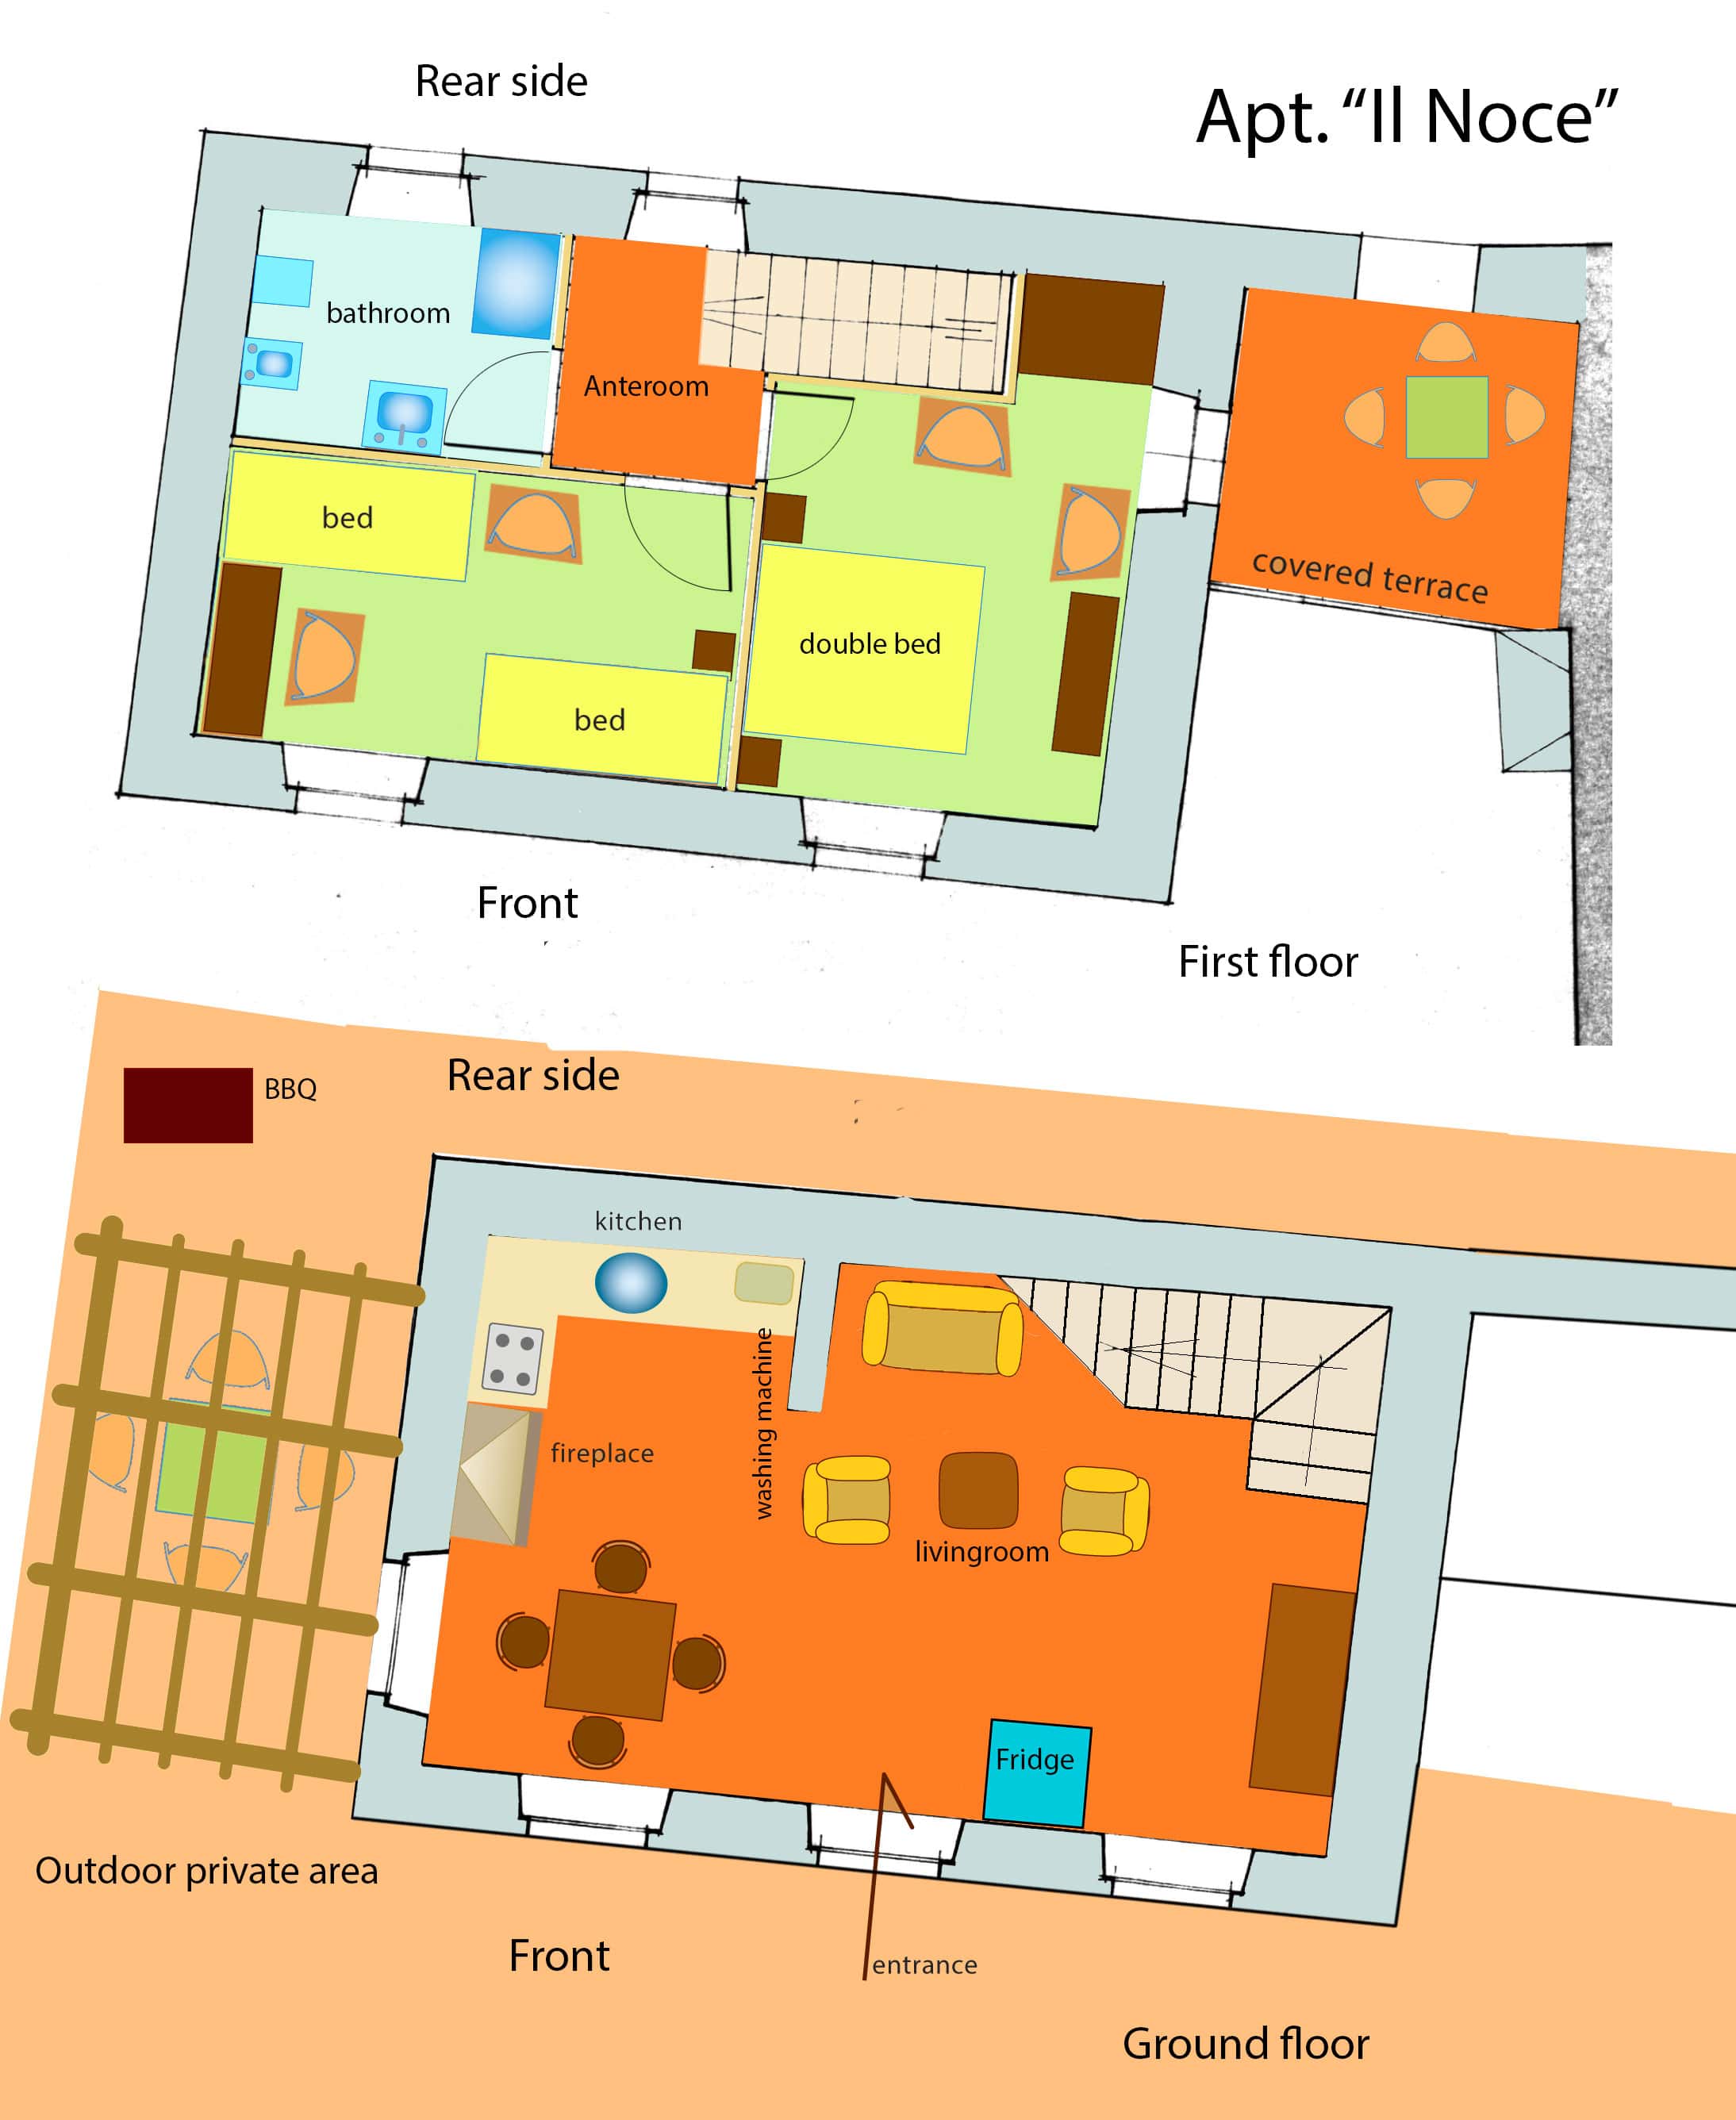 layout of the apt1